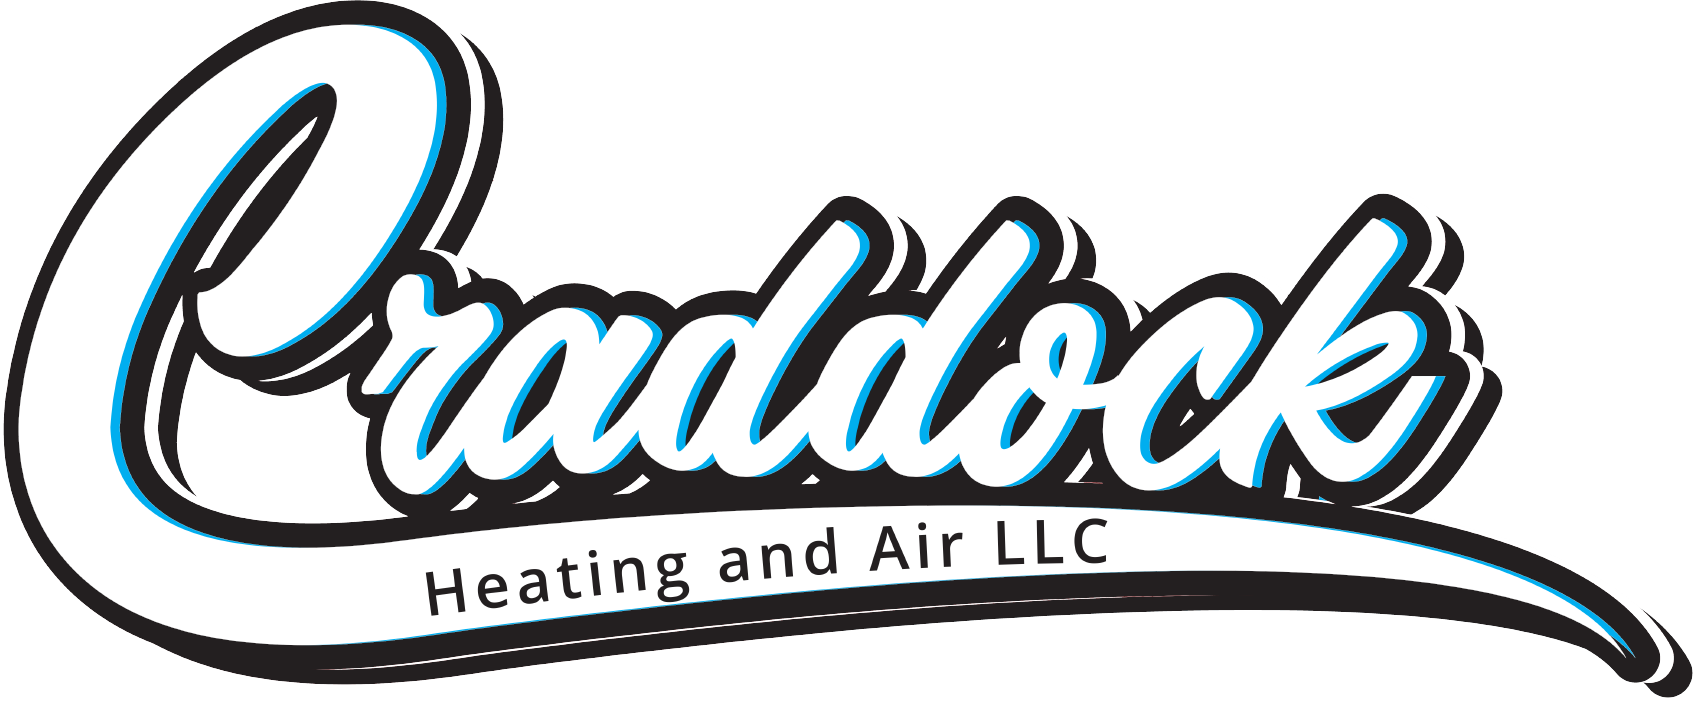 craddock heating and air logo white